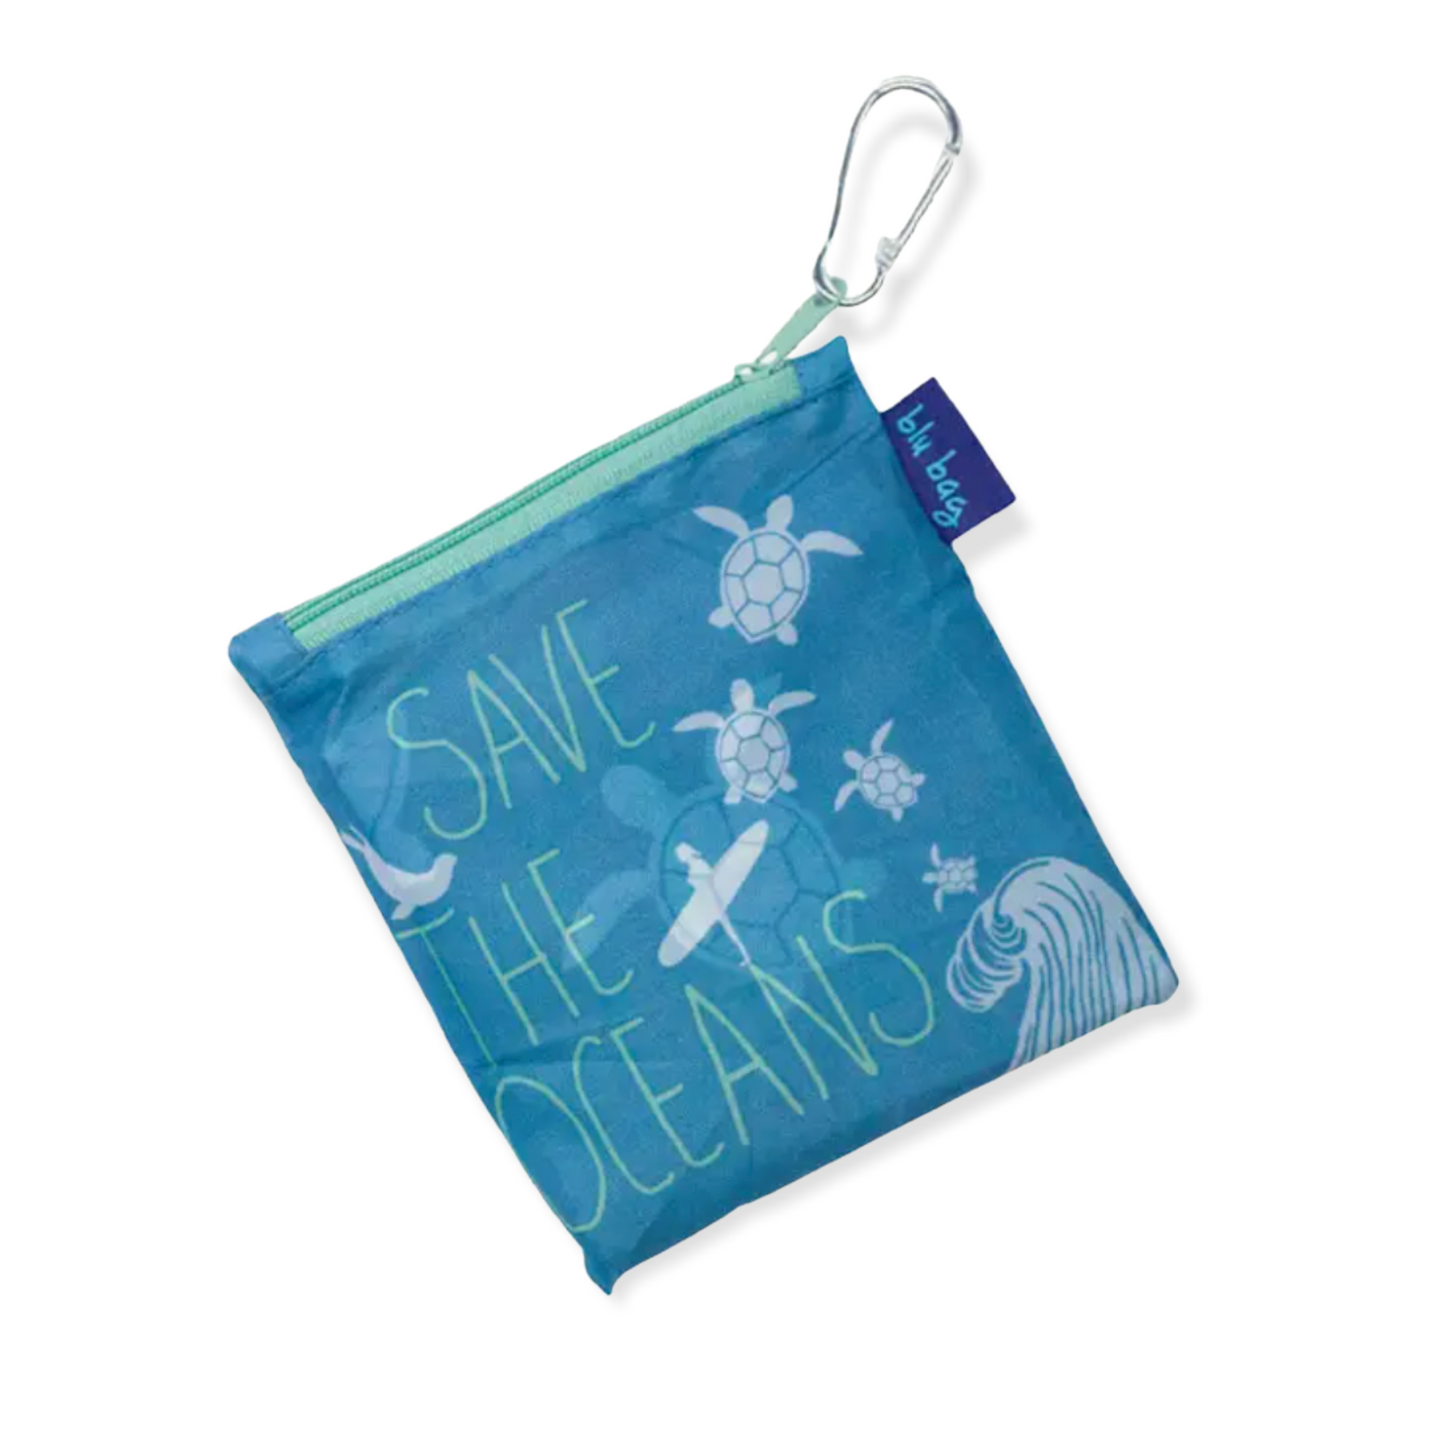 Tote | SAVE THE OCEANS 'Blu Bag' Reusable Shopping